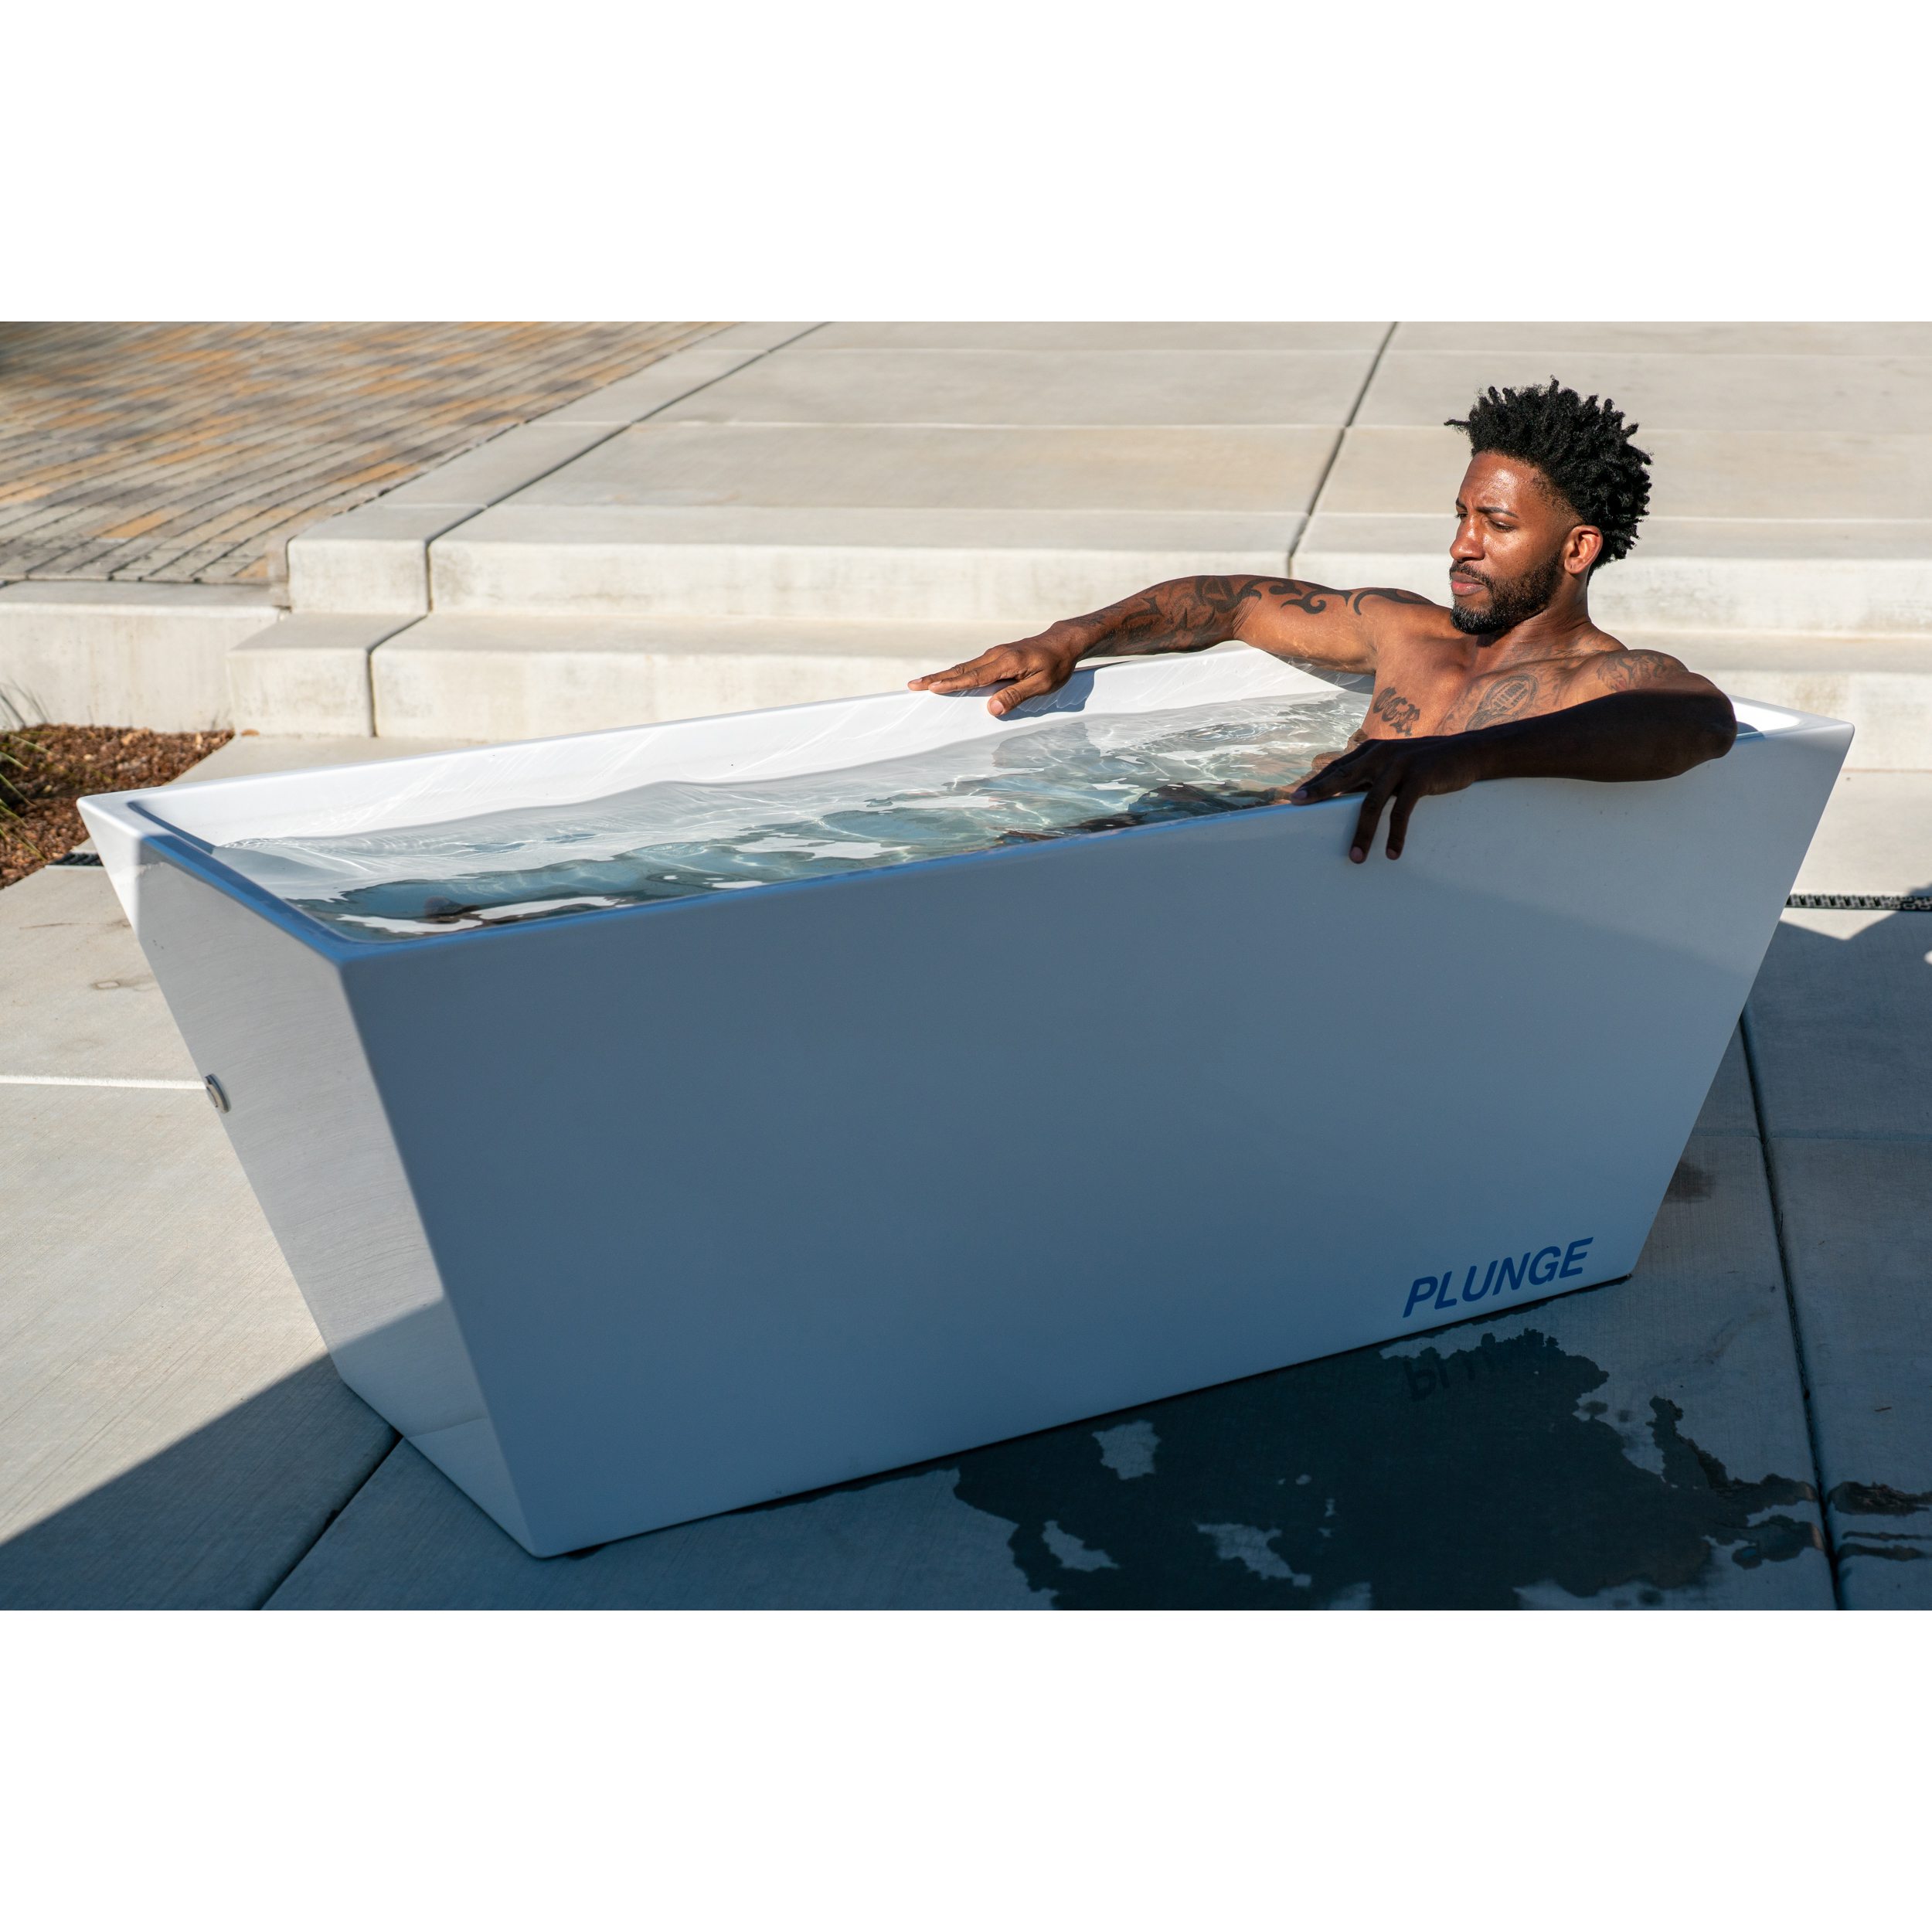 https://huckberry.imgix.net/spree/products/693449/original/79004_Plunge_Cold_Plunge_White_Lifestyle_08.jpg